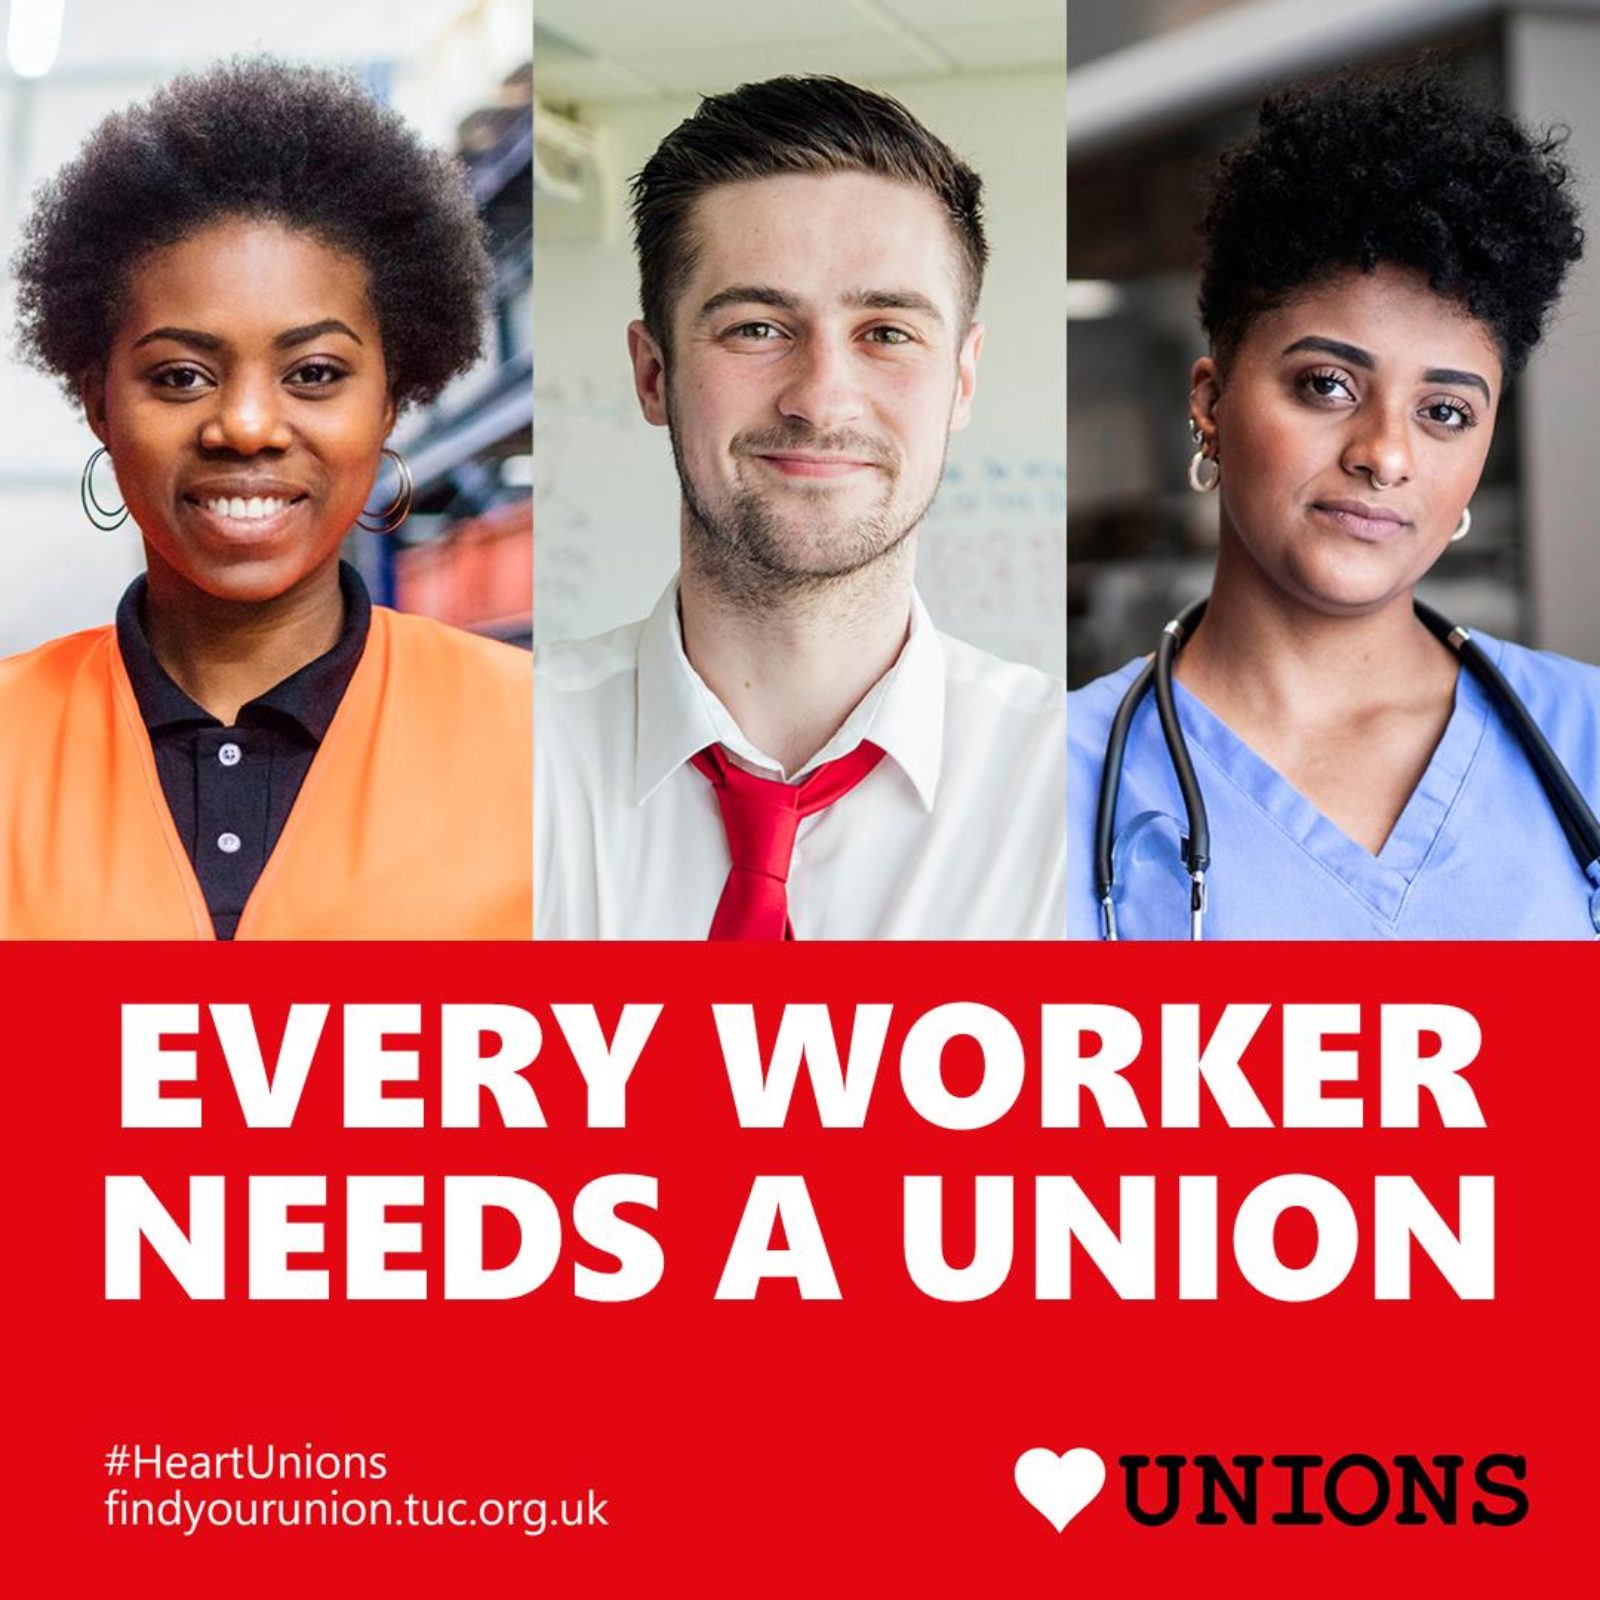 Every Worker needs a Union